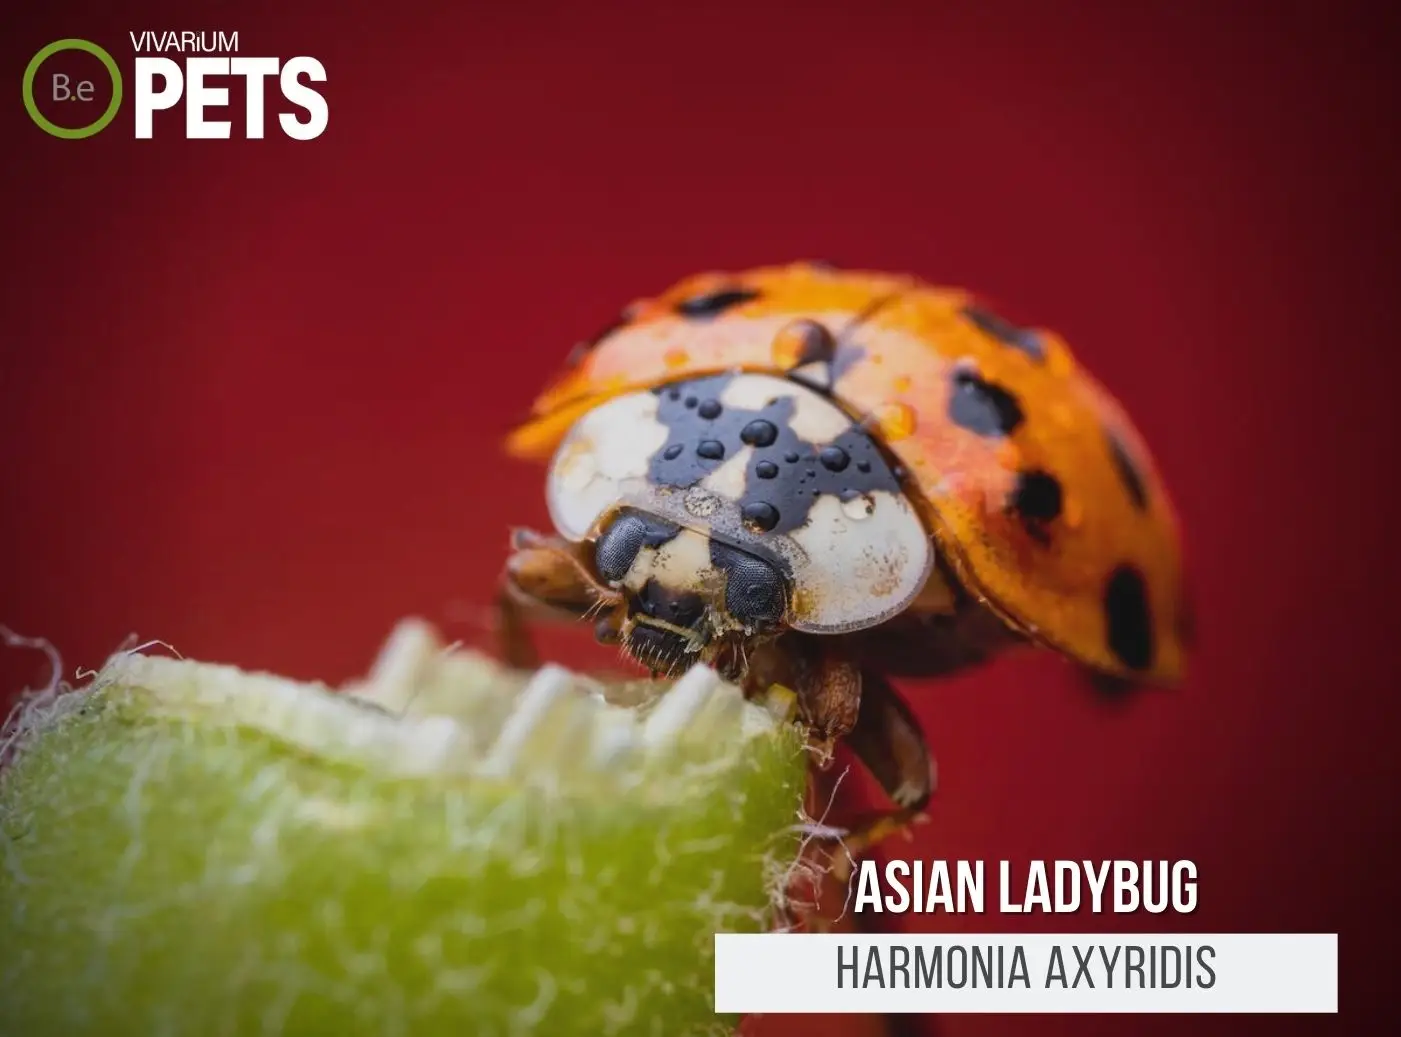 The mighty ladybug has a voracious appetite for more than just